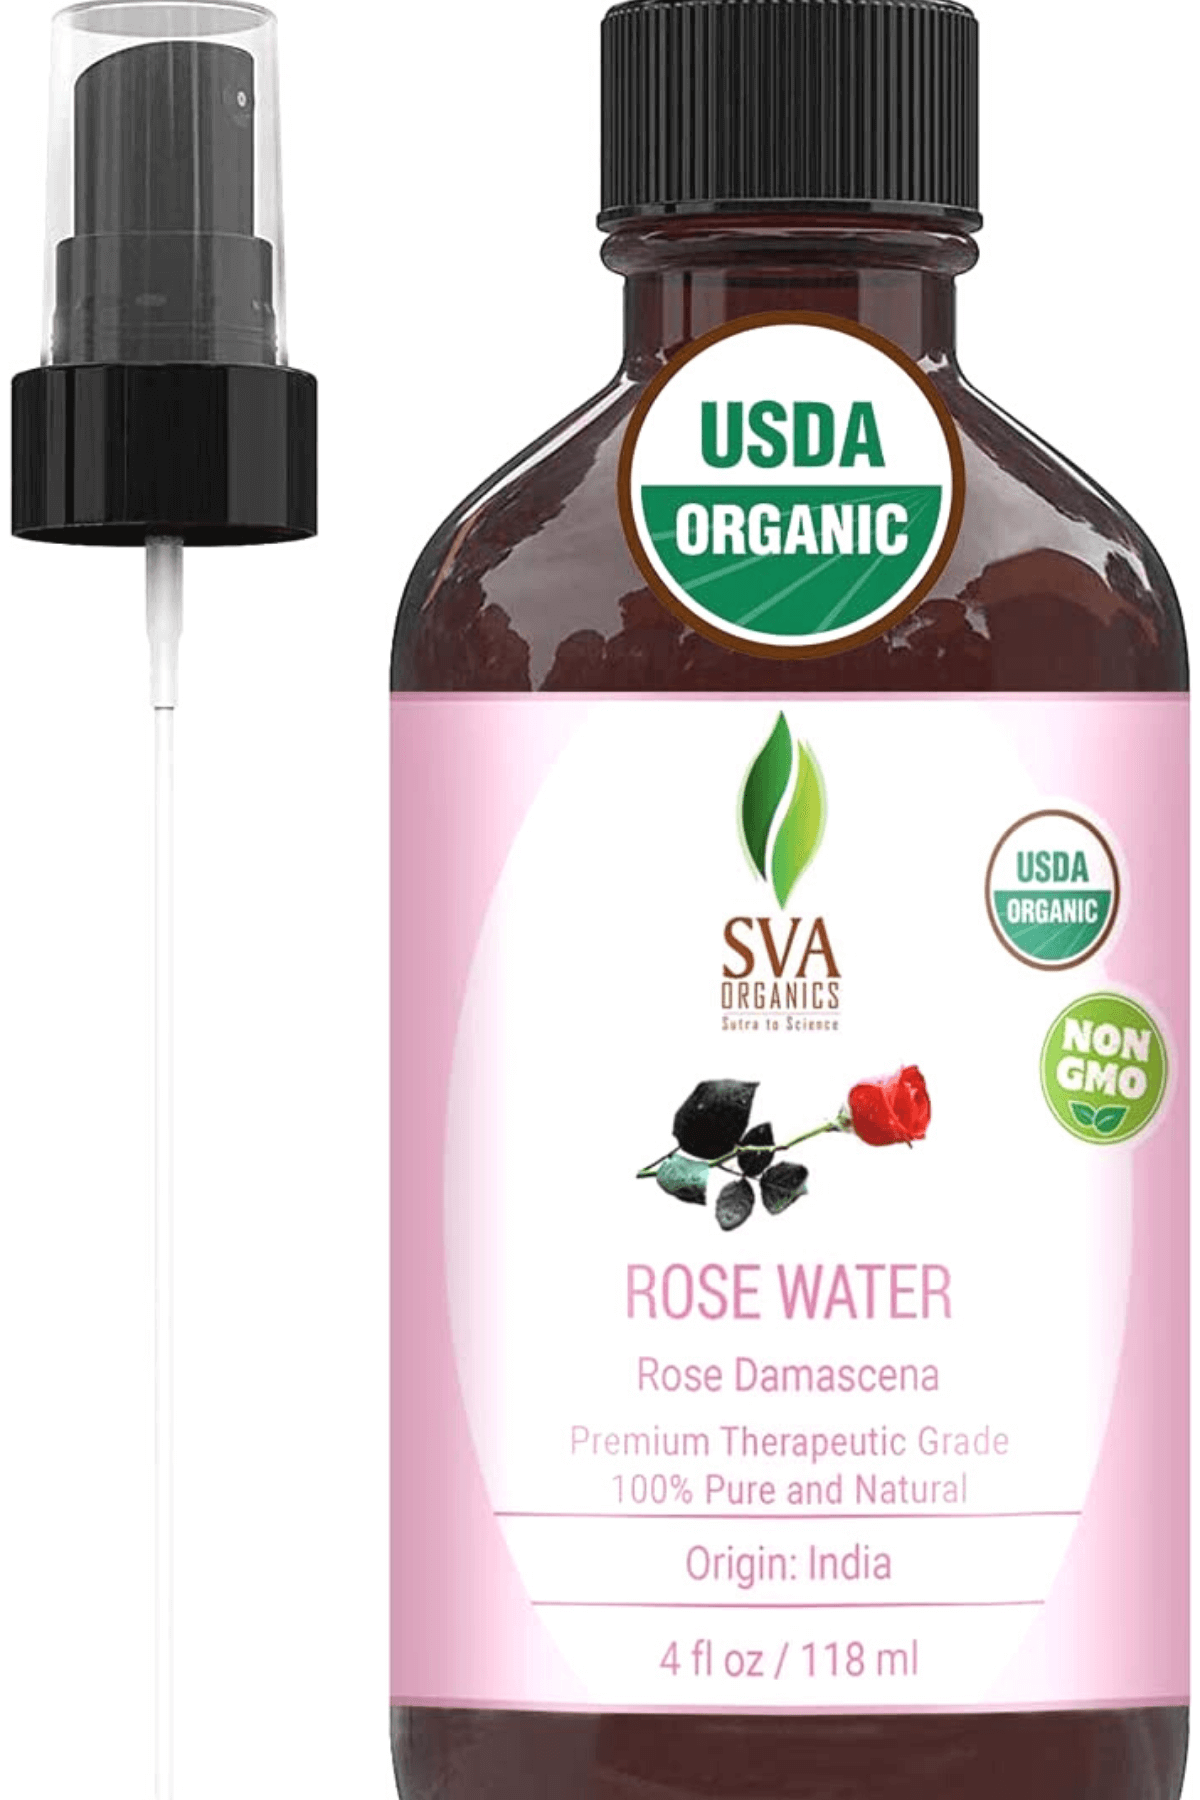 Rose water brand used for rose ice cream.